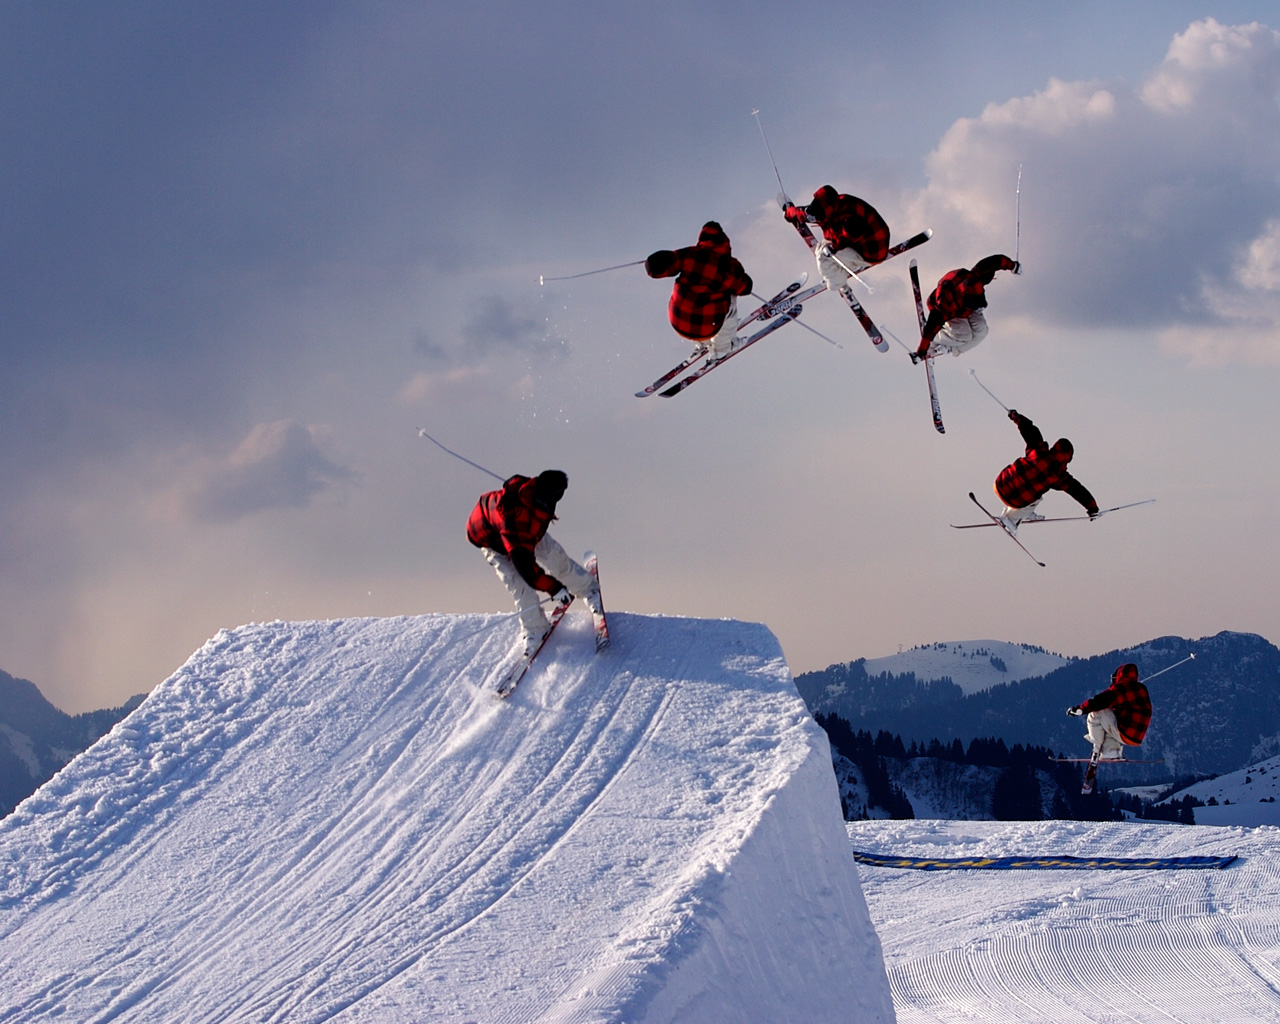 Quotes About Skiing To Start Your Winter Thrillist